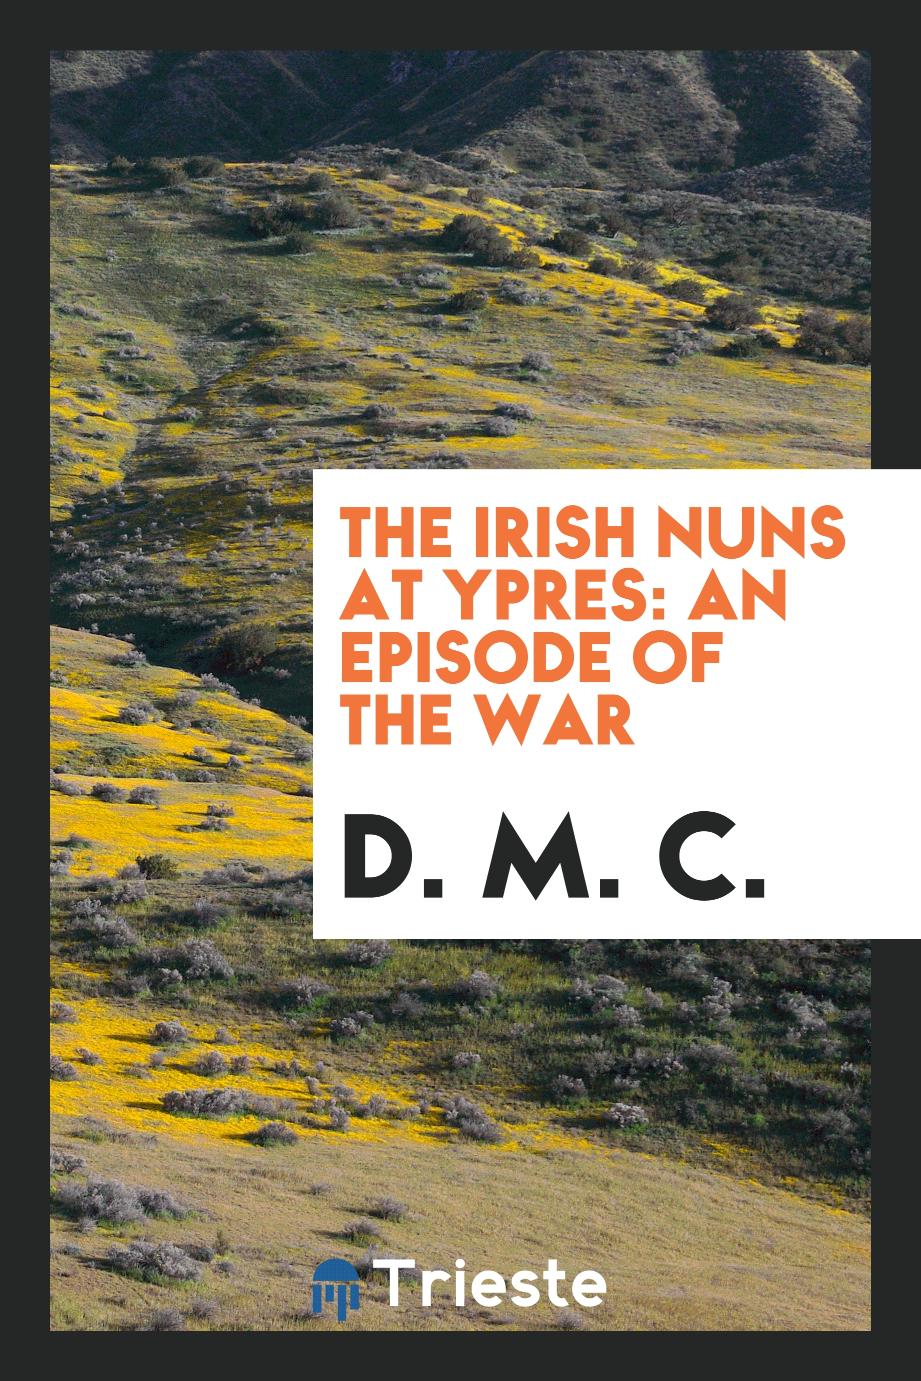 The Irish nuns at Ypres: an episode of the war